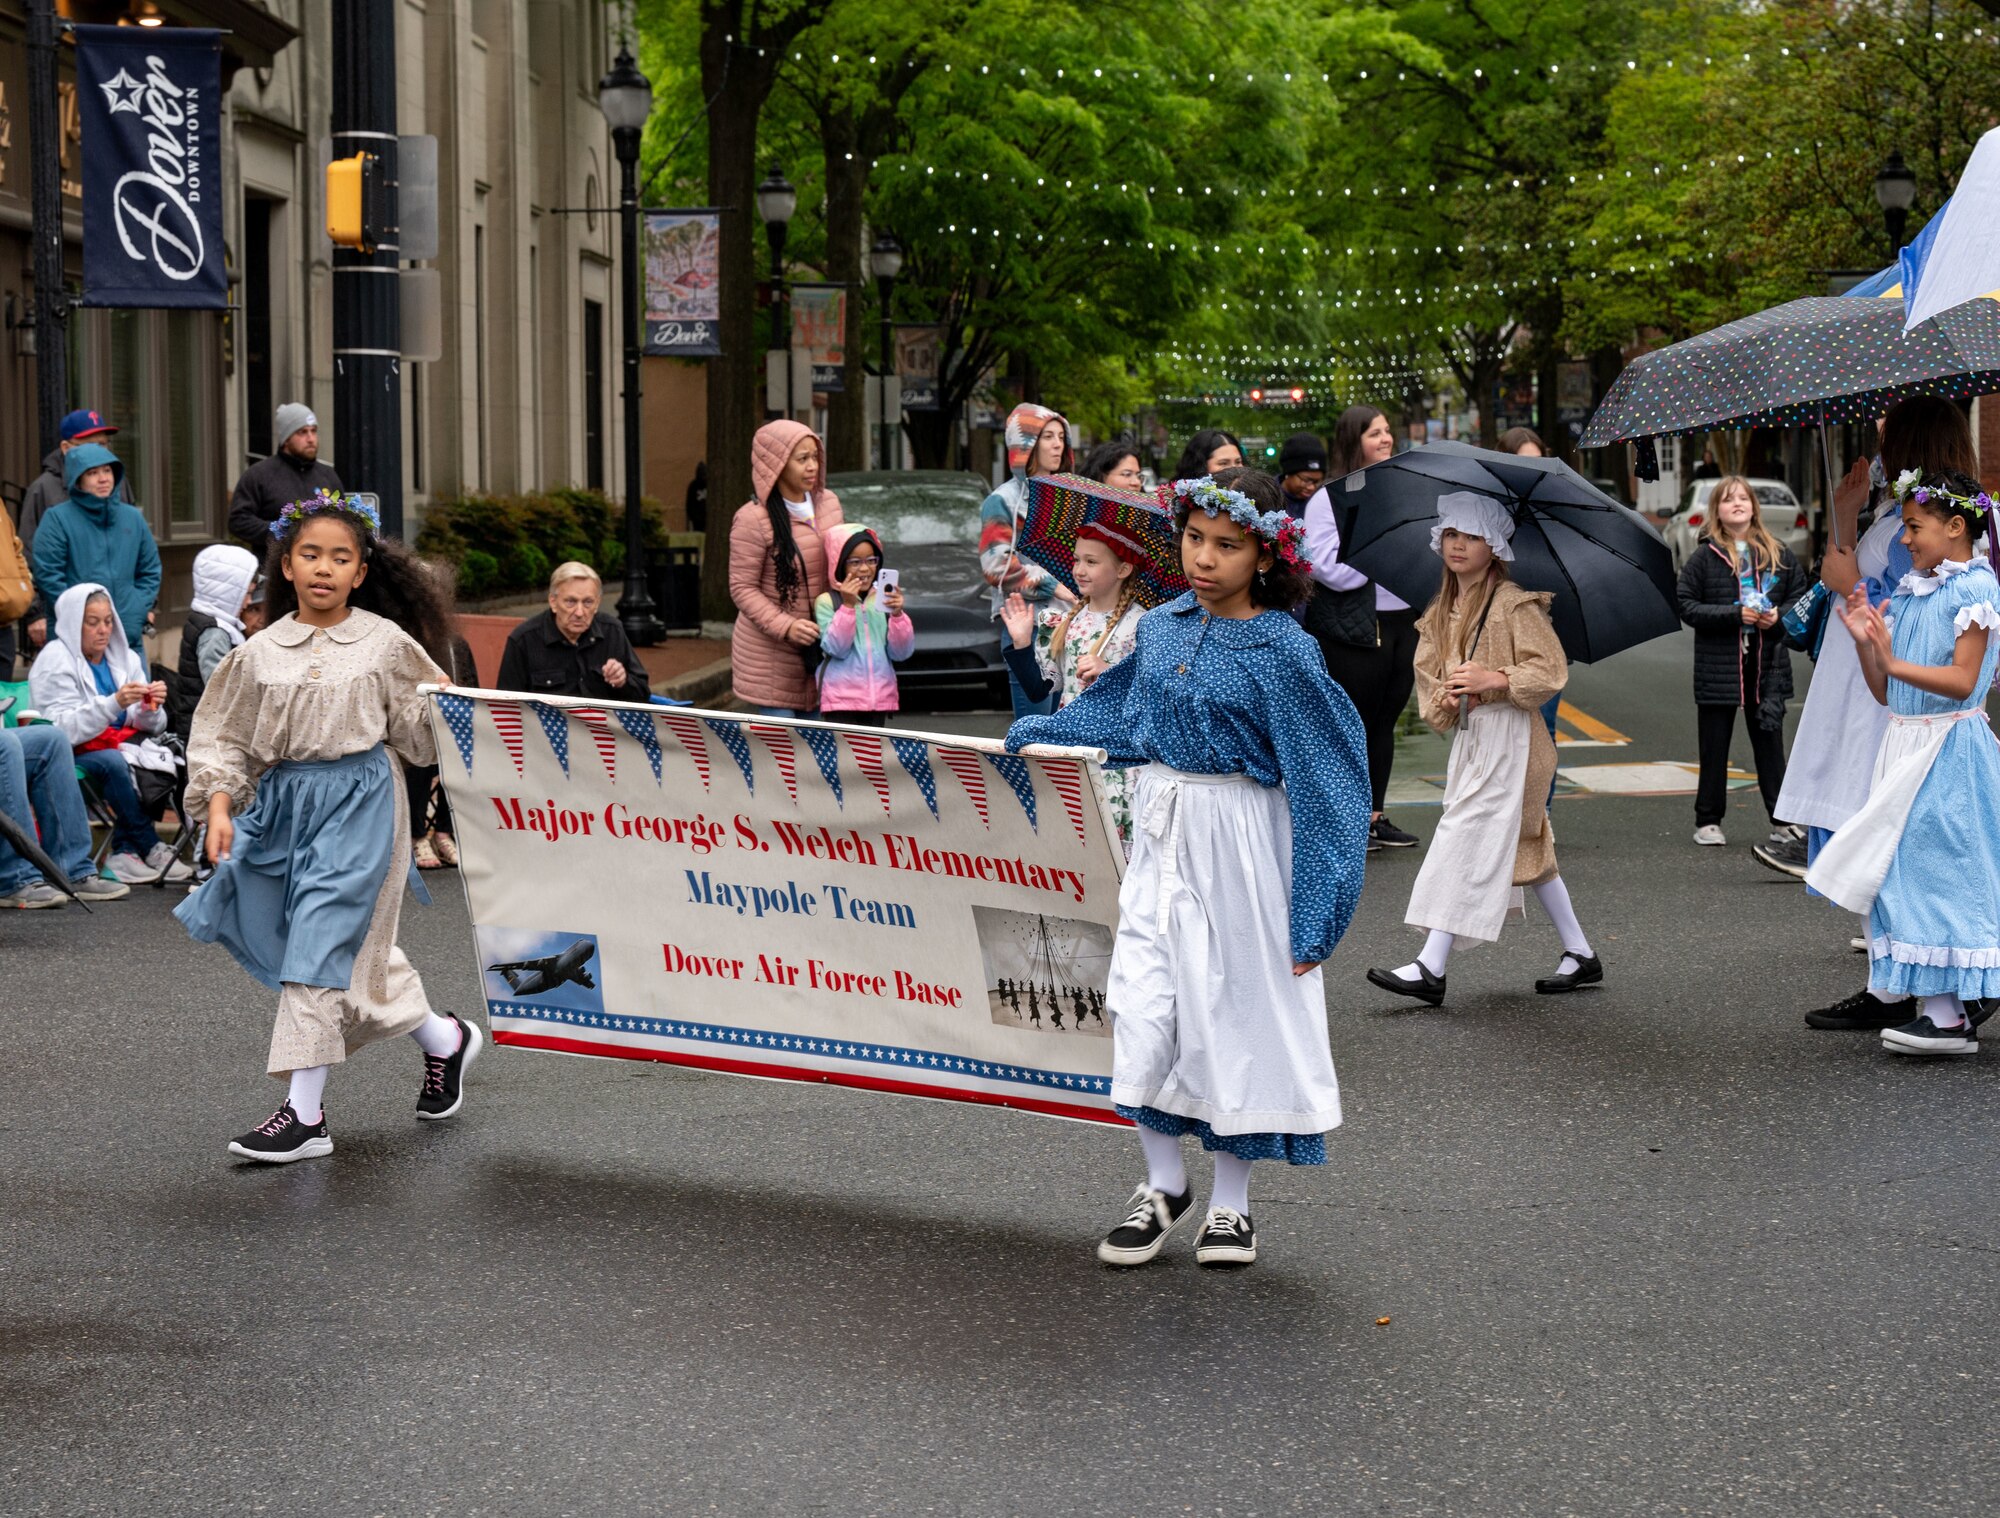 Kids from Maj. George S. Welch Elementary school, hold a school banner during the Dover Days Parade in Dover, Delaware, May 4, 2024. Students participated in the 91st Annual Dover Days Festival and Parade, an event that highlights the First State’s history and heritage. (U.S. Air Force photo by Airman 1st Class Amanda Jett)